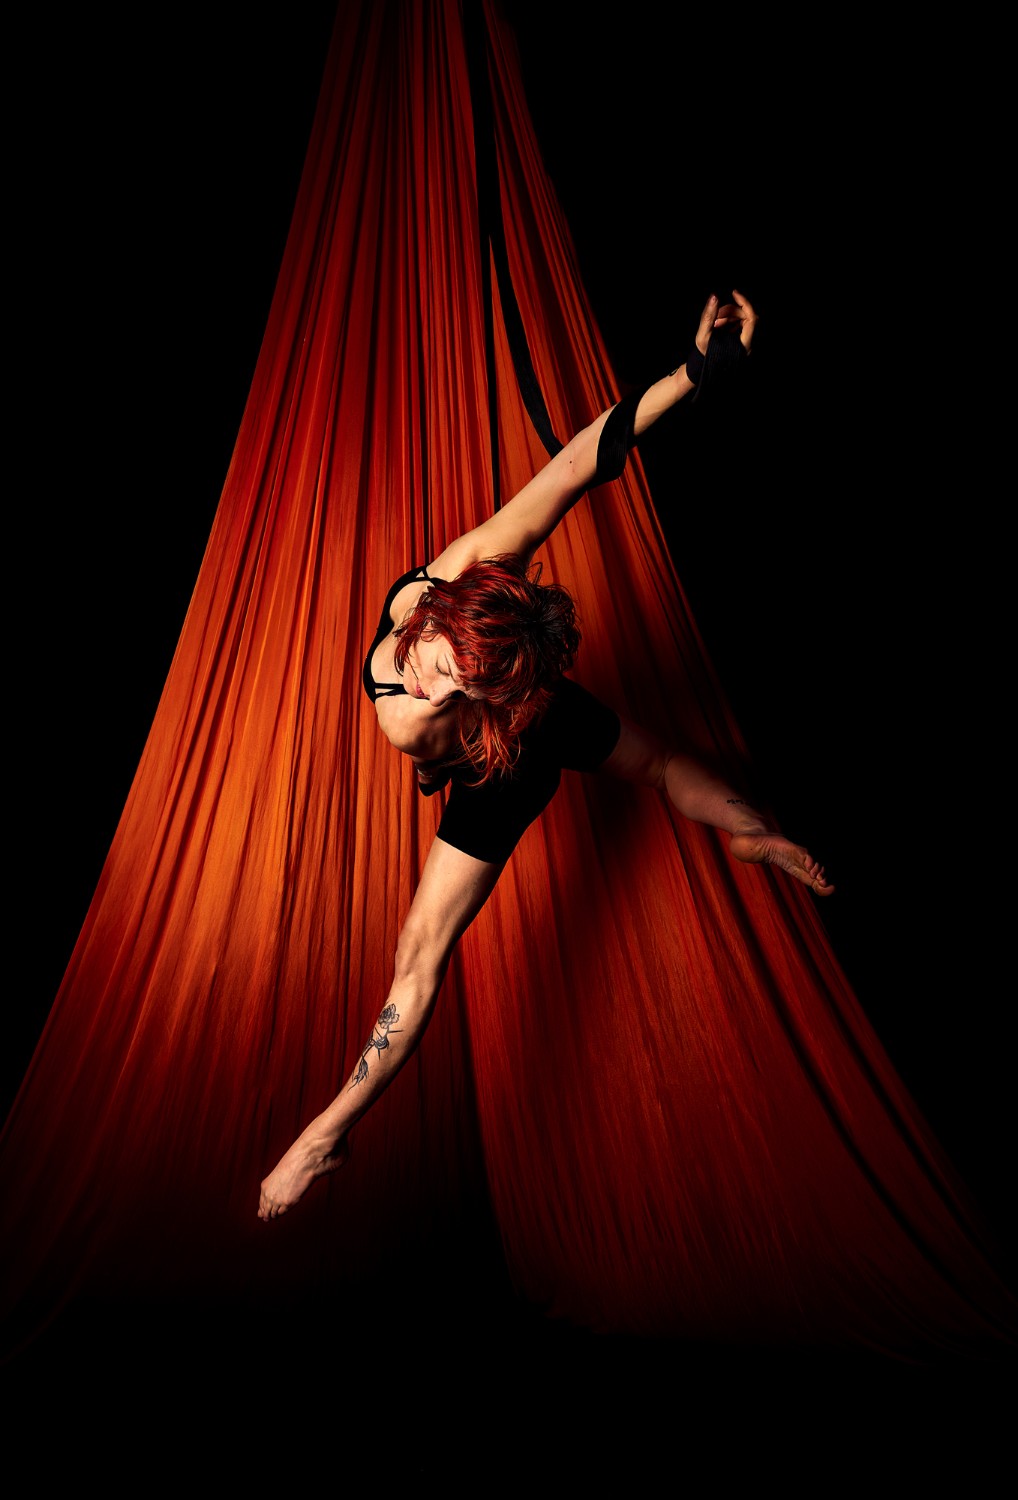 Olympia aerial artist Giselle performs in her home studio.